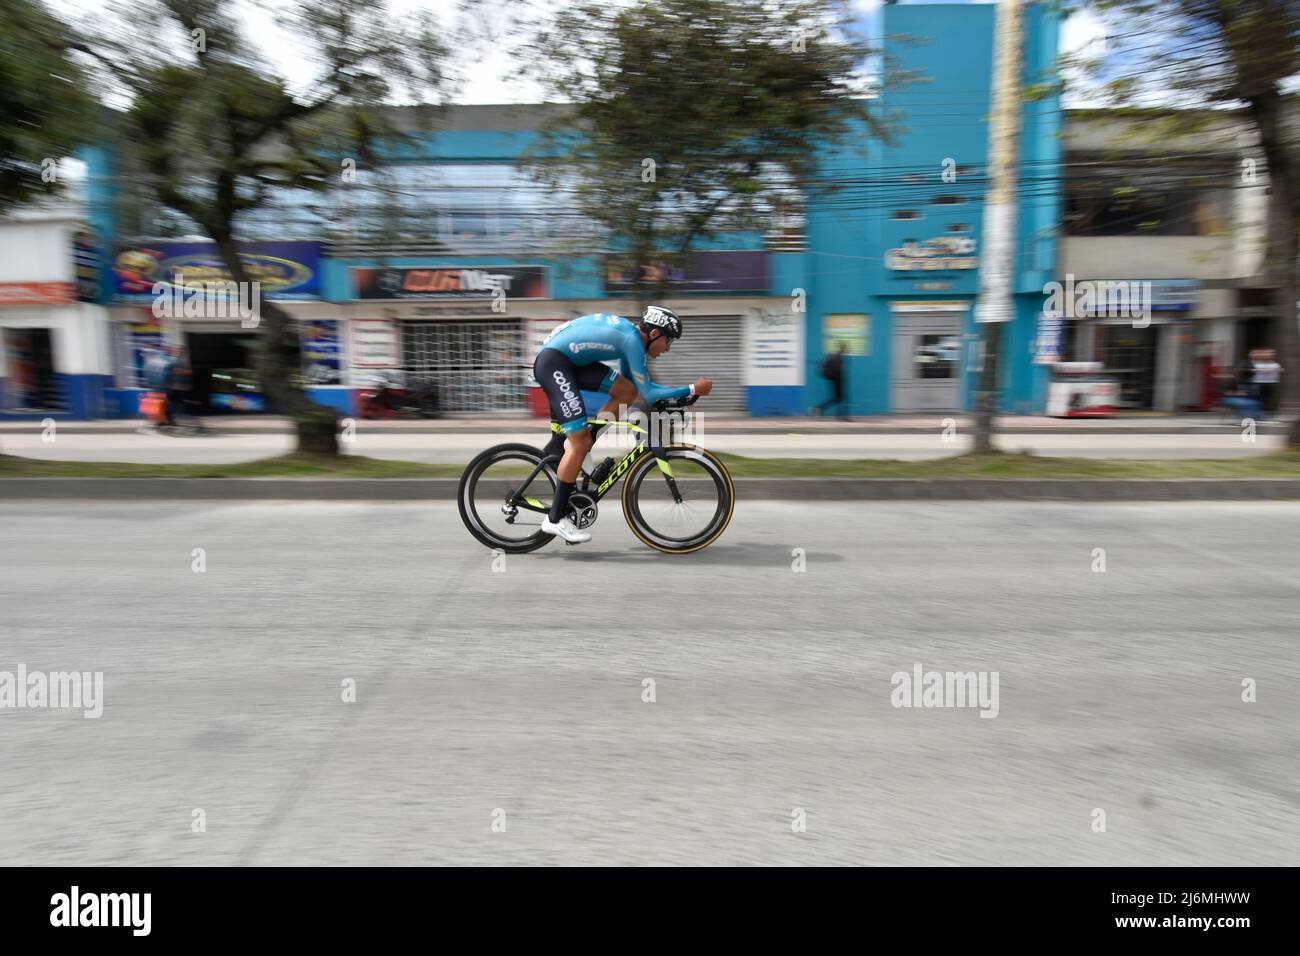 Pasto, Colombia. 02nd May, 2022. Participants compete during the 2022 Vuelta de la Juventud cycling race in Pasto, Colombia on May 2, 2022. Photo by: Camilo Erasso/Long Visual Press Credit: Long Visual Press/Alamy Live News Stock Photo